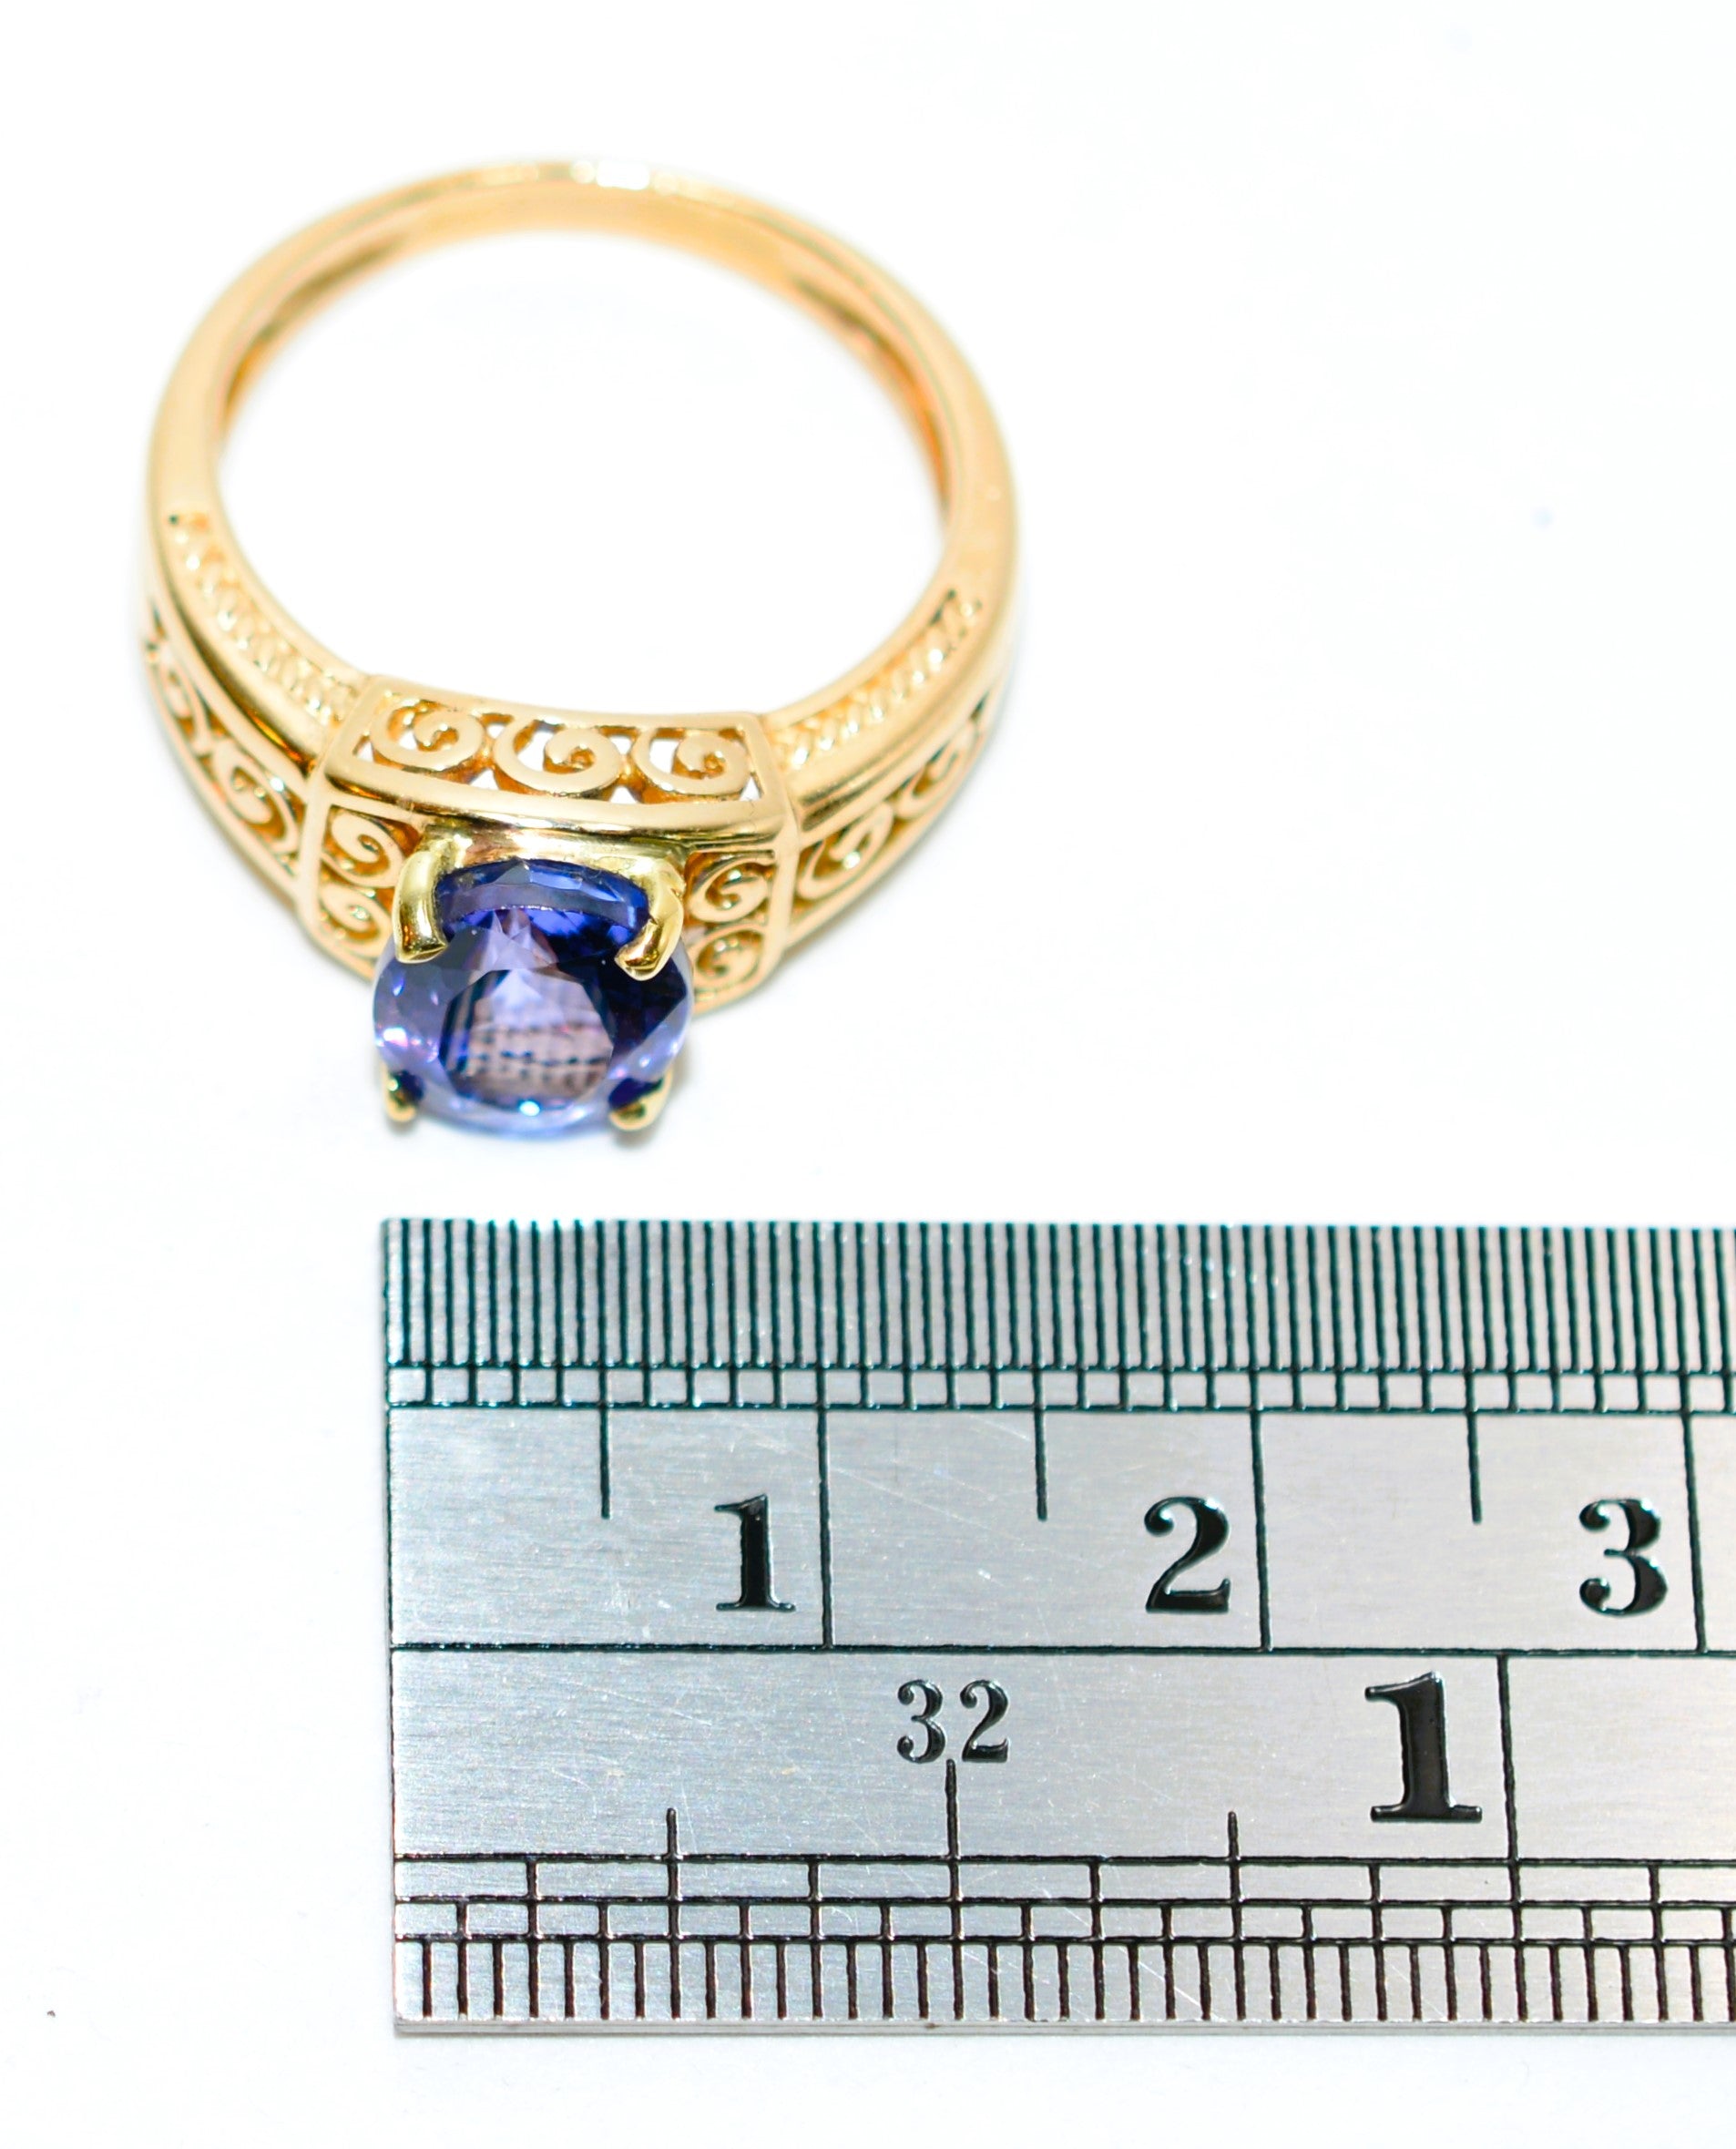 Certified Natural Tanzanite Ring 14K Solid Gold 2.69ct Solitaire Ring Vintage Ring December Birthstone Ring Estate Jewelry Jewellery